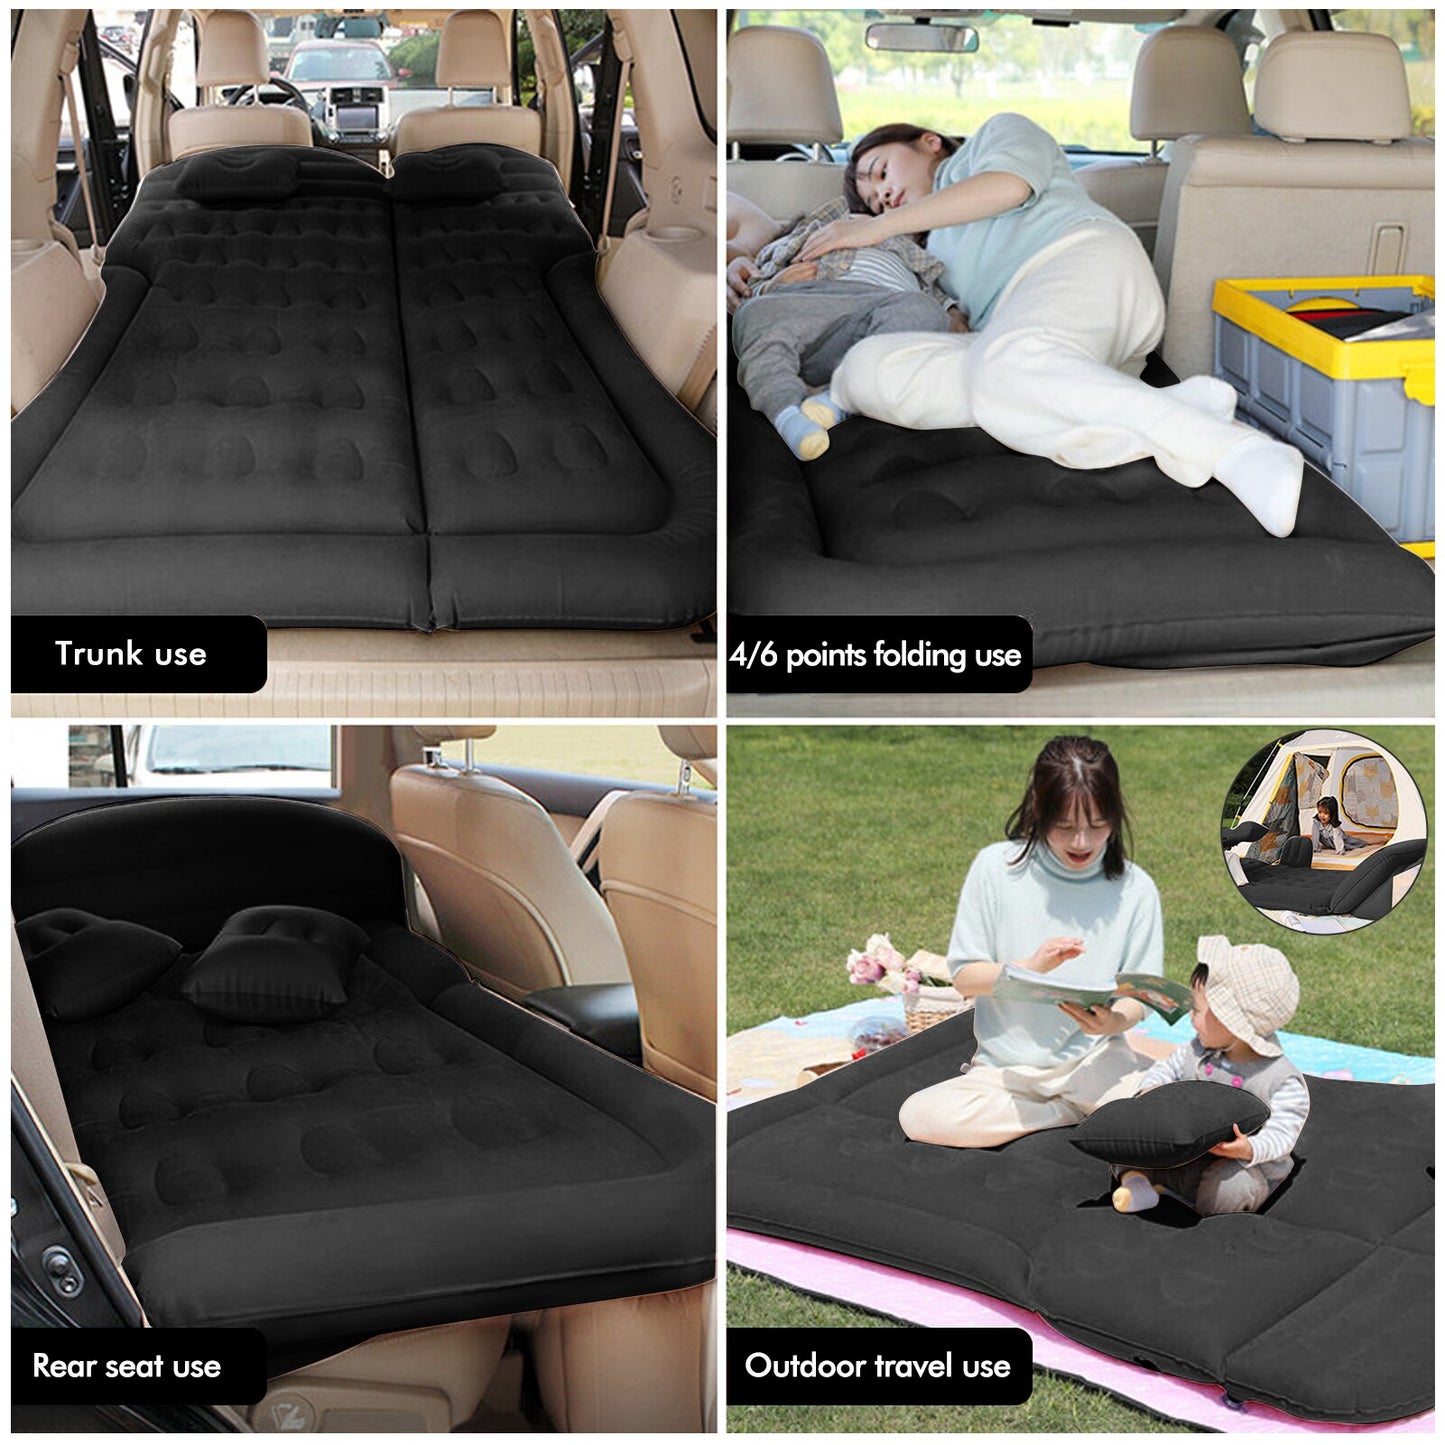 Inflatable Car Air Mattress and Travel Bed for Roadtrips and Camping